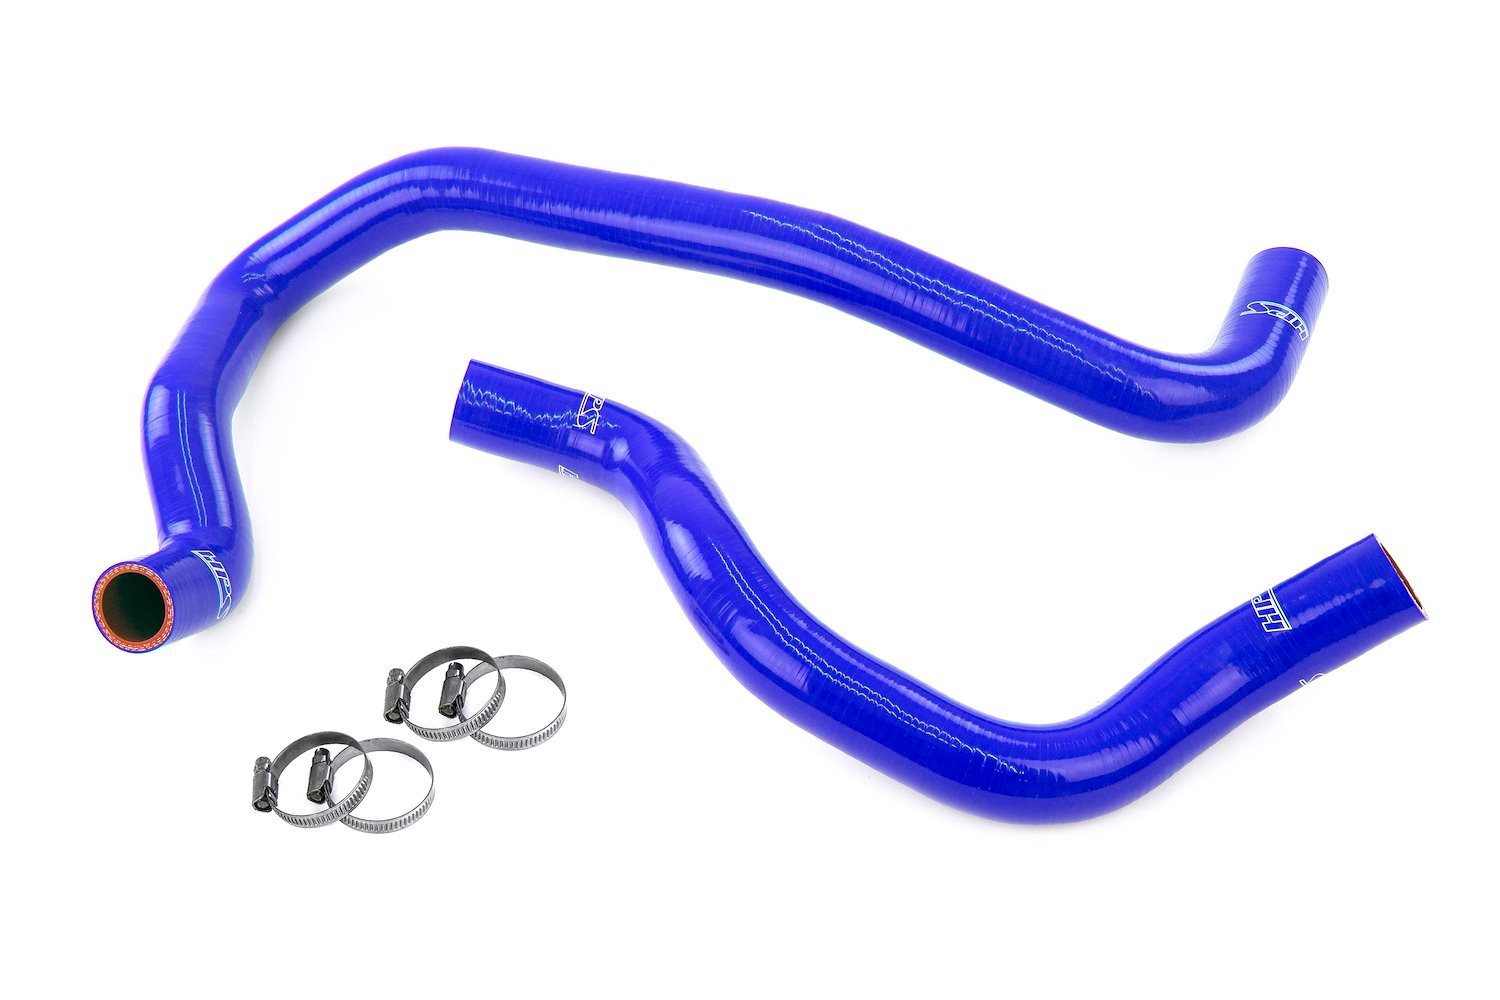 57-2048-BLUE Radiator Hose Kit, 3-Ply Reinforced Silicone, Replaces Rubber Radiator Coolant Hoses